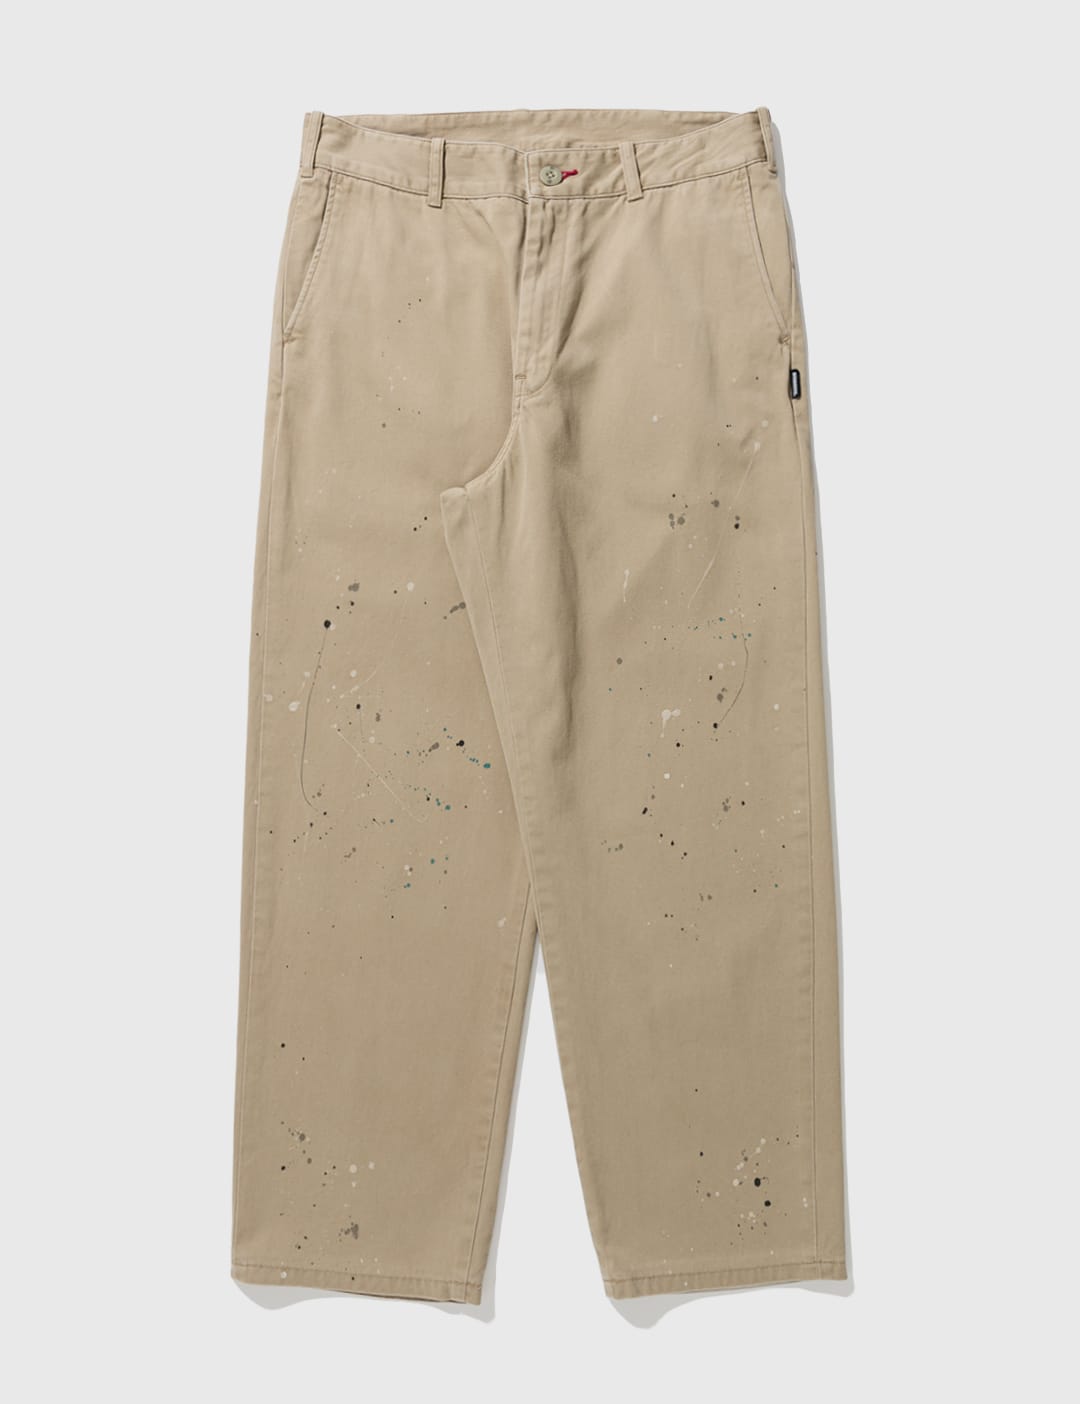 Rotol - Franken Cargo Pants | HBX - Globally Curated Fashion and 